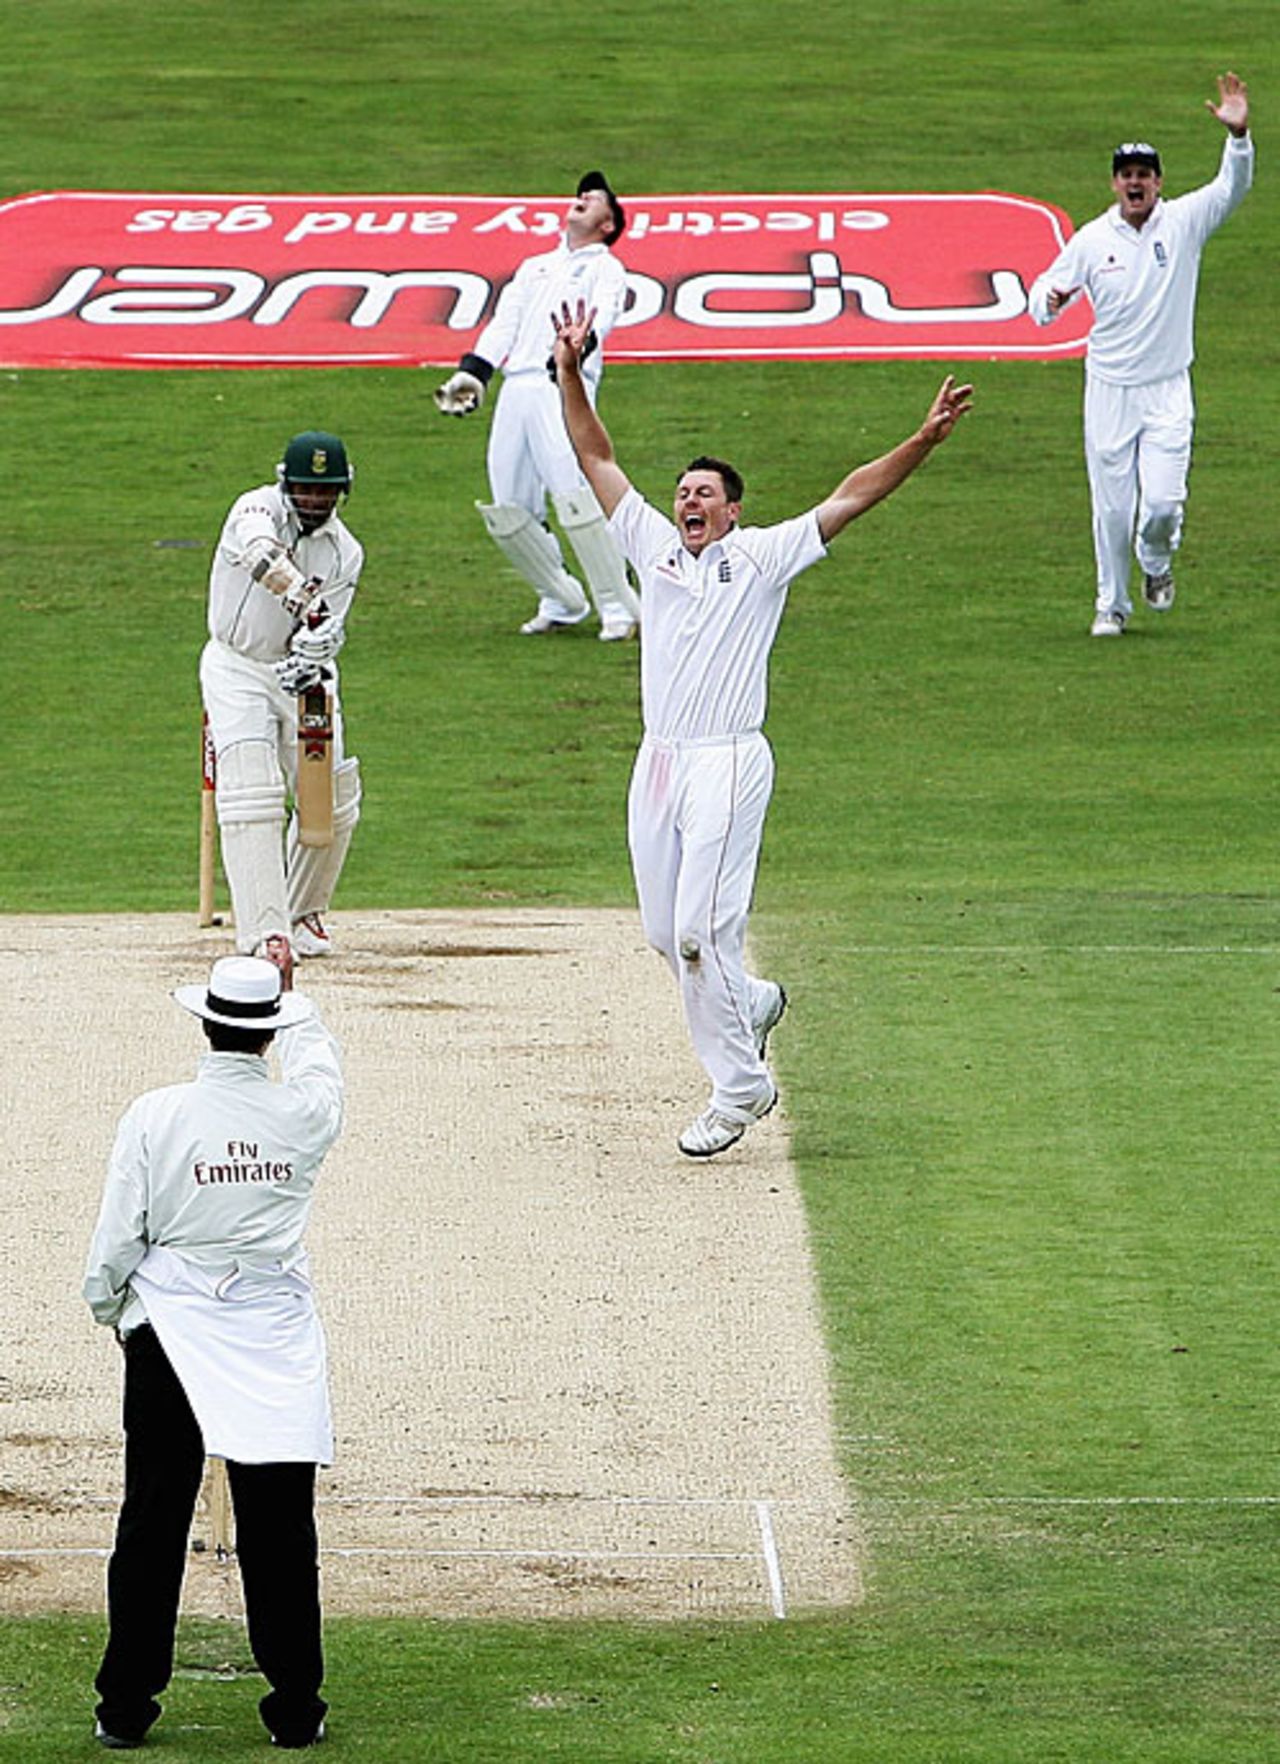 Ashwell Prince is caught behind off Darren Pattinson, England v South Africa, 2nd Test, Headingley, July 20, 2008